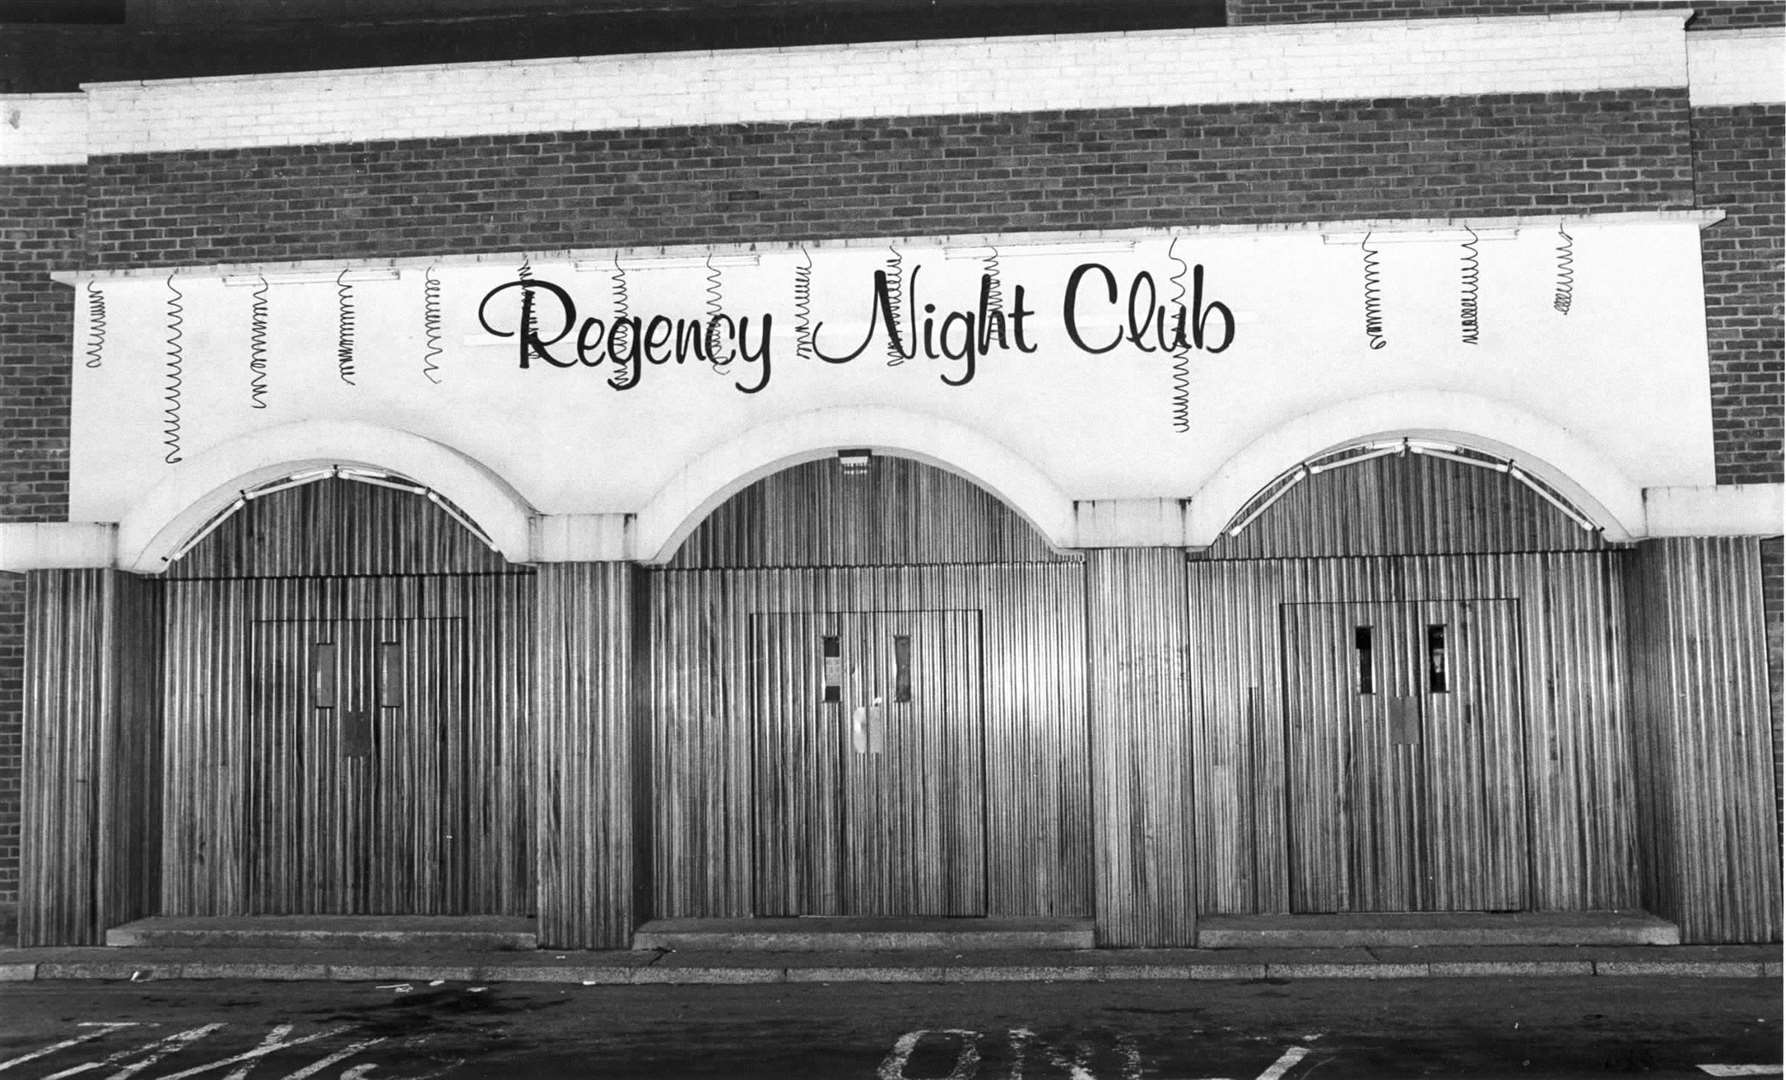 The Regency Night Club in Gillingham pictured in November 1988. Launched as the NAAFI club, the venue became The Regency in 1982 before its final incarnation as Excalibur — which enjoyed a hugely successful run which last from 1989 until its close in 1998.